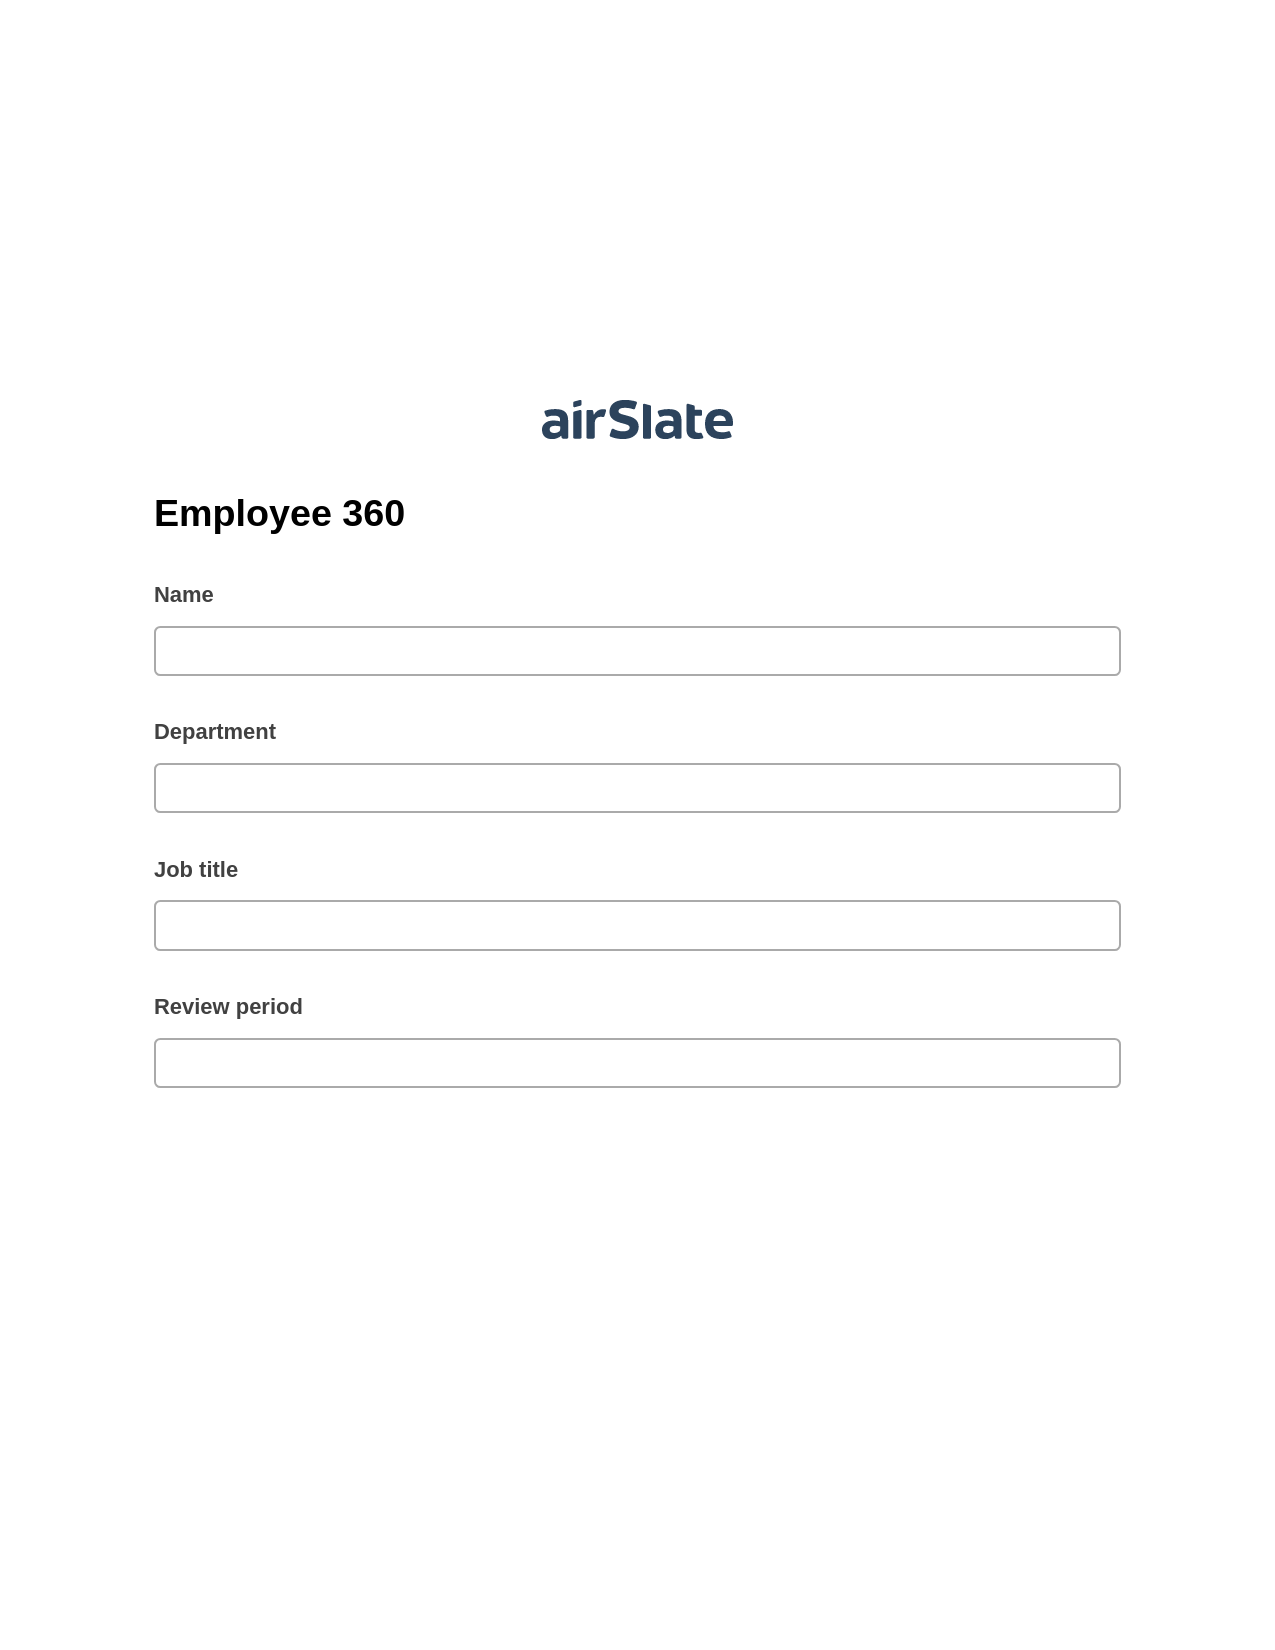 Multirole Employee 360 Pre-fill from MS Dynamics 365 Records, Export to MS Dynamics 365 Bot, Text Message Notification Postfinish Bot